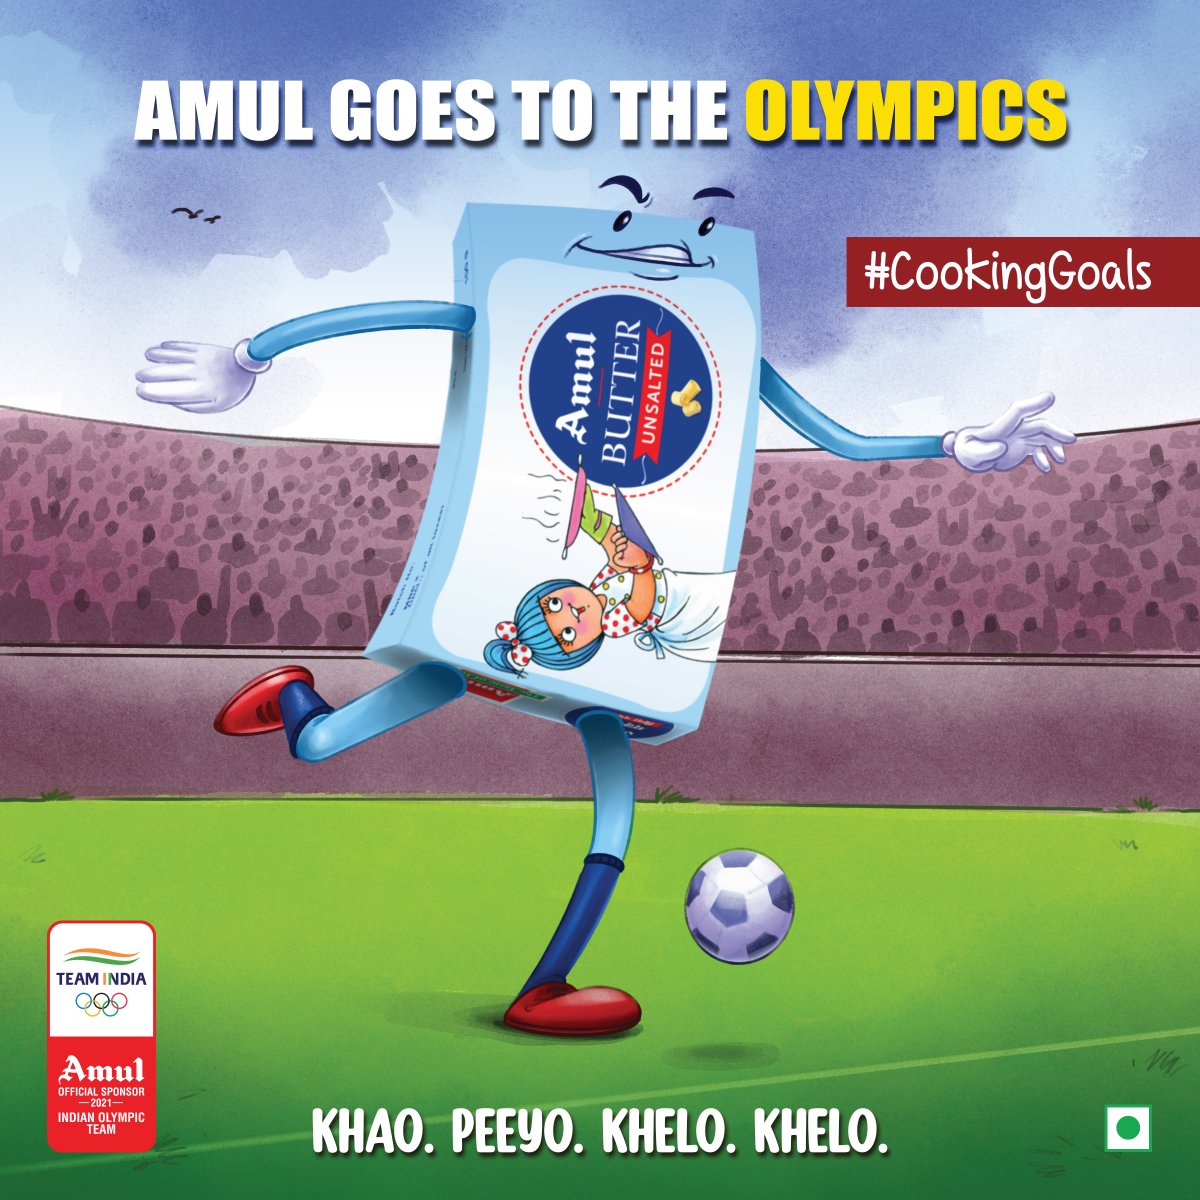 ‘Kick-start’ your day with Amul Unsalted Butter, a healthy source of fats and nutrients for your body! Amul - Proud official sponsor for the 2021 Indian Olympic Team. 
#AmulIndia #Olympics2021 #TokyoOlympics2020 #AmulUnsaltedButter #CookingGoals